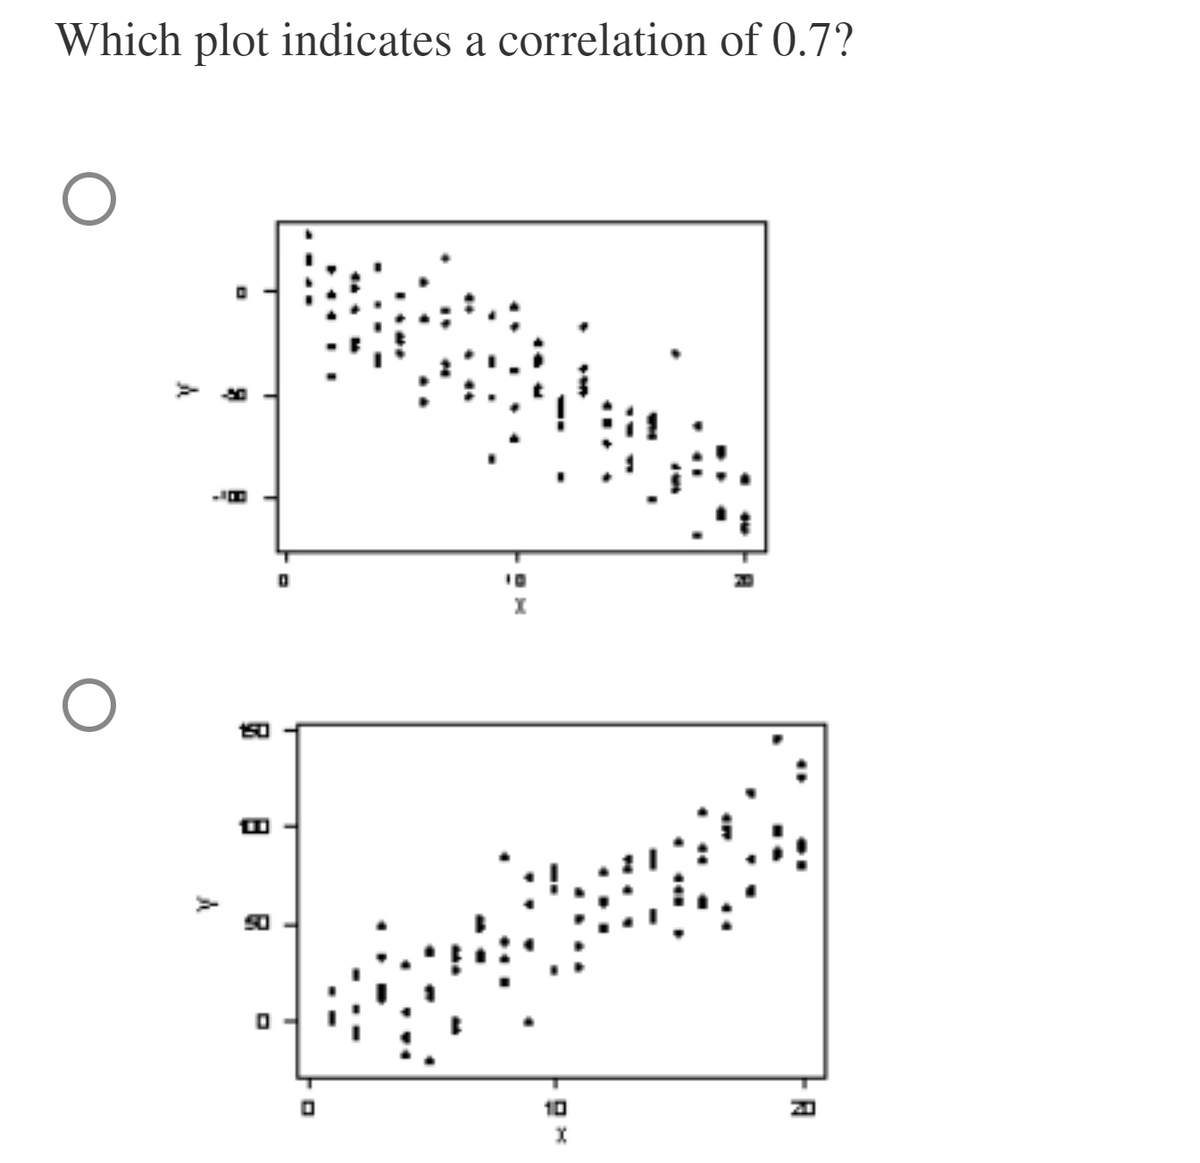 Which plot indicates a correlation of 0.7?
10
A
